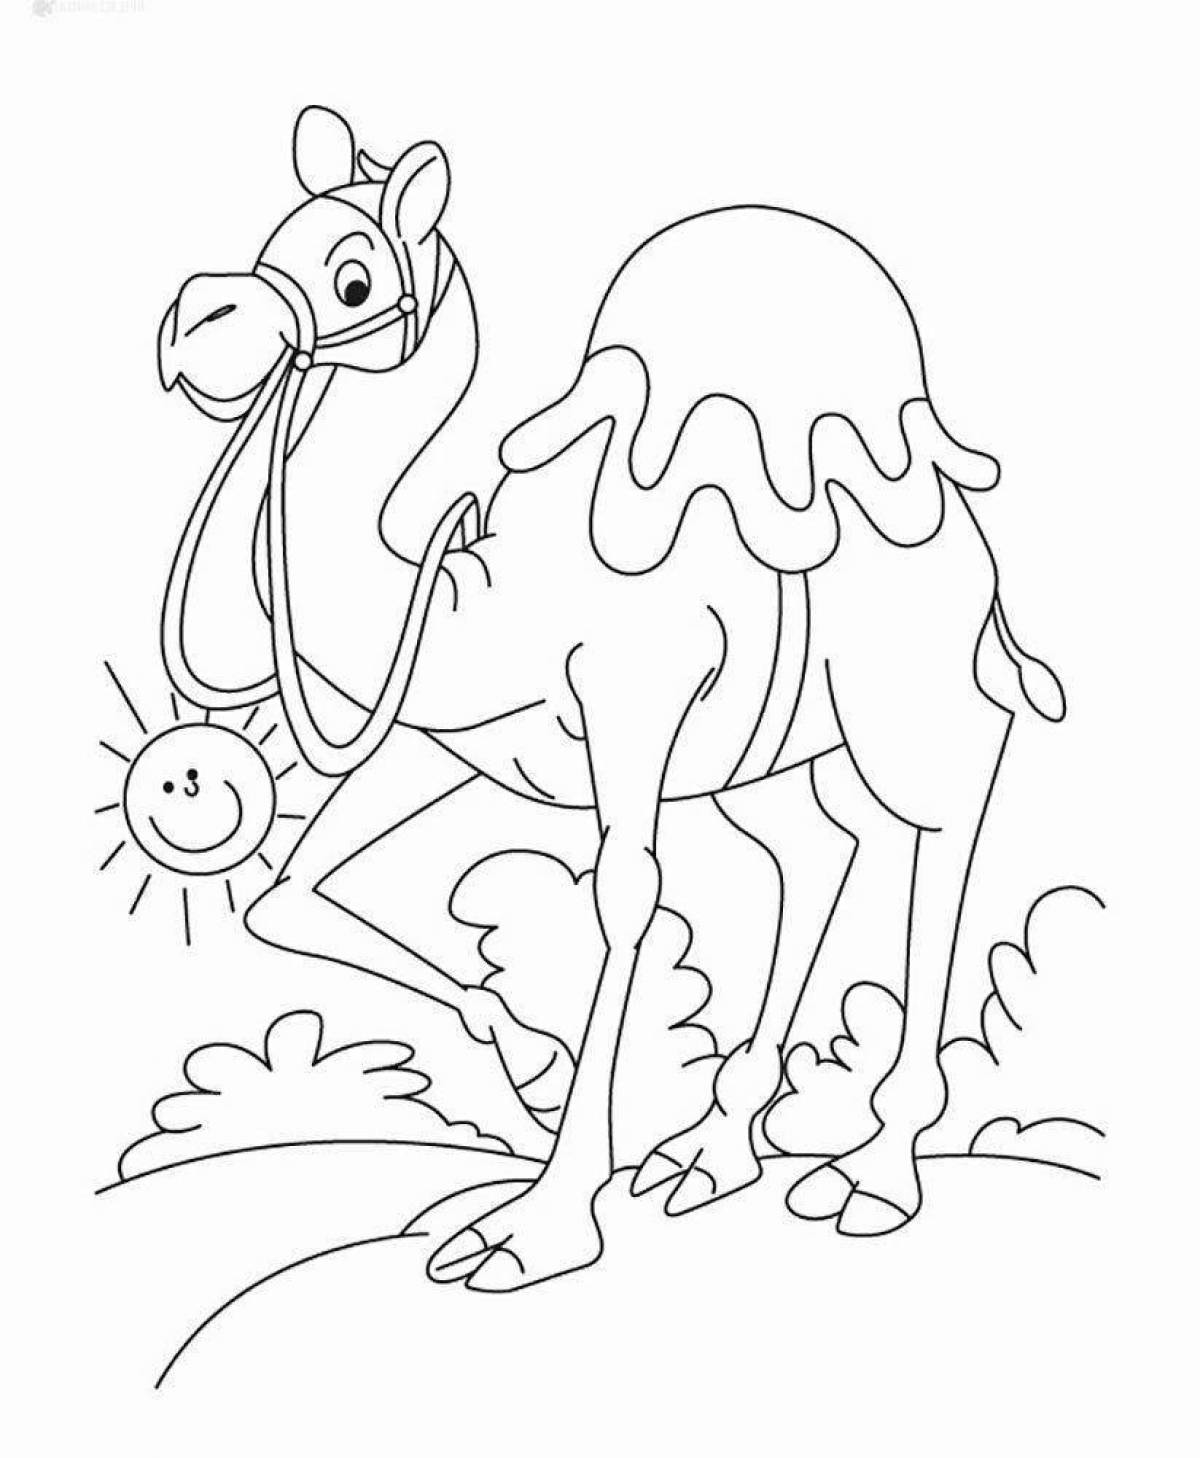 Magic camel coloring pages for kids